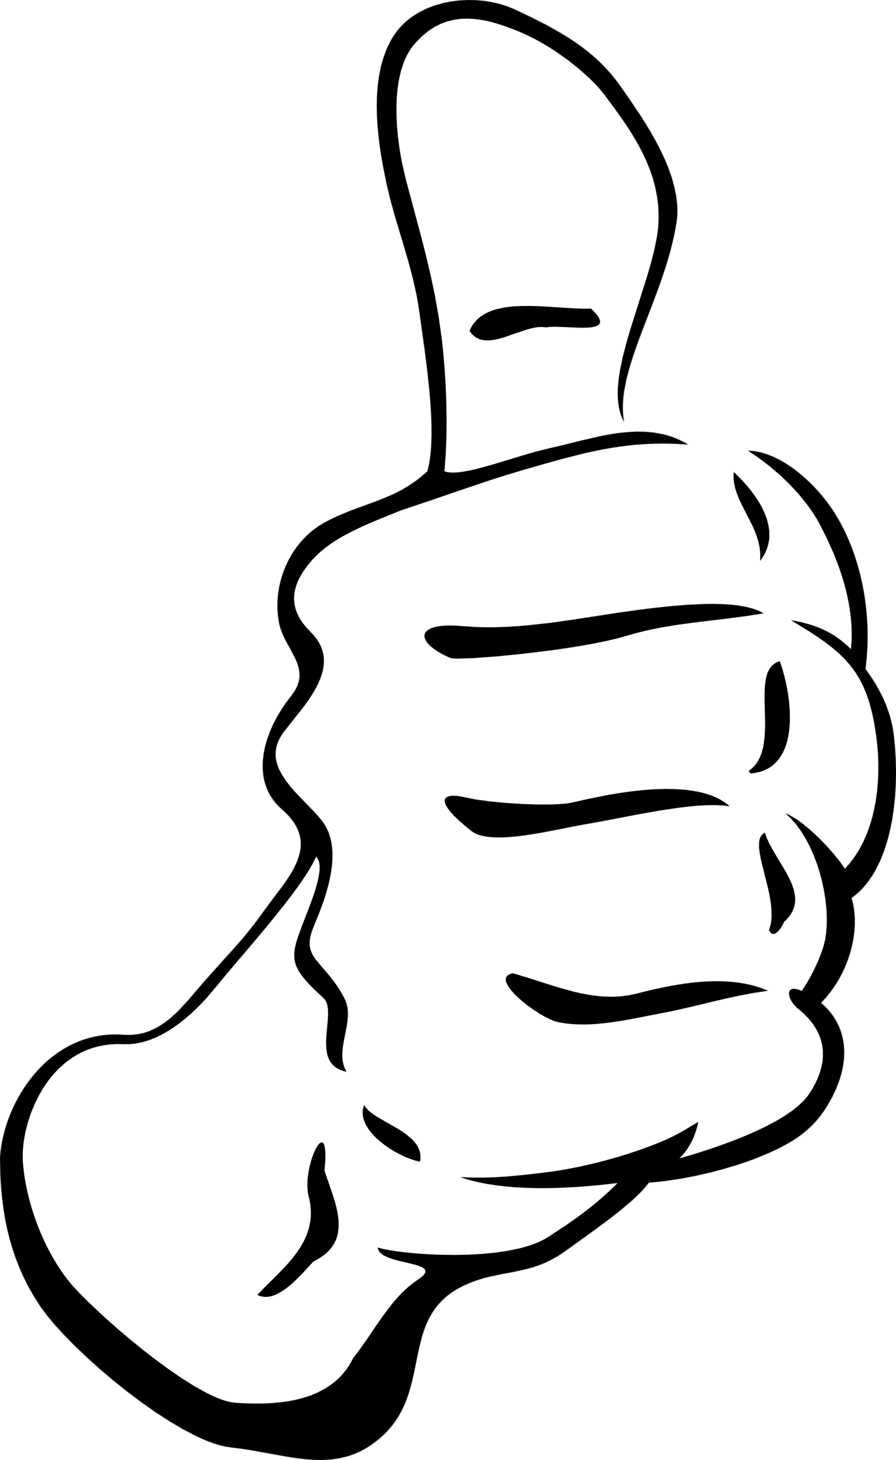 Hands clipart transparent background. Free thumbs up download